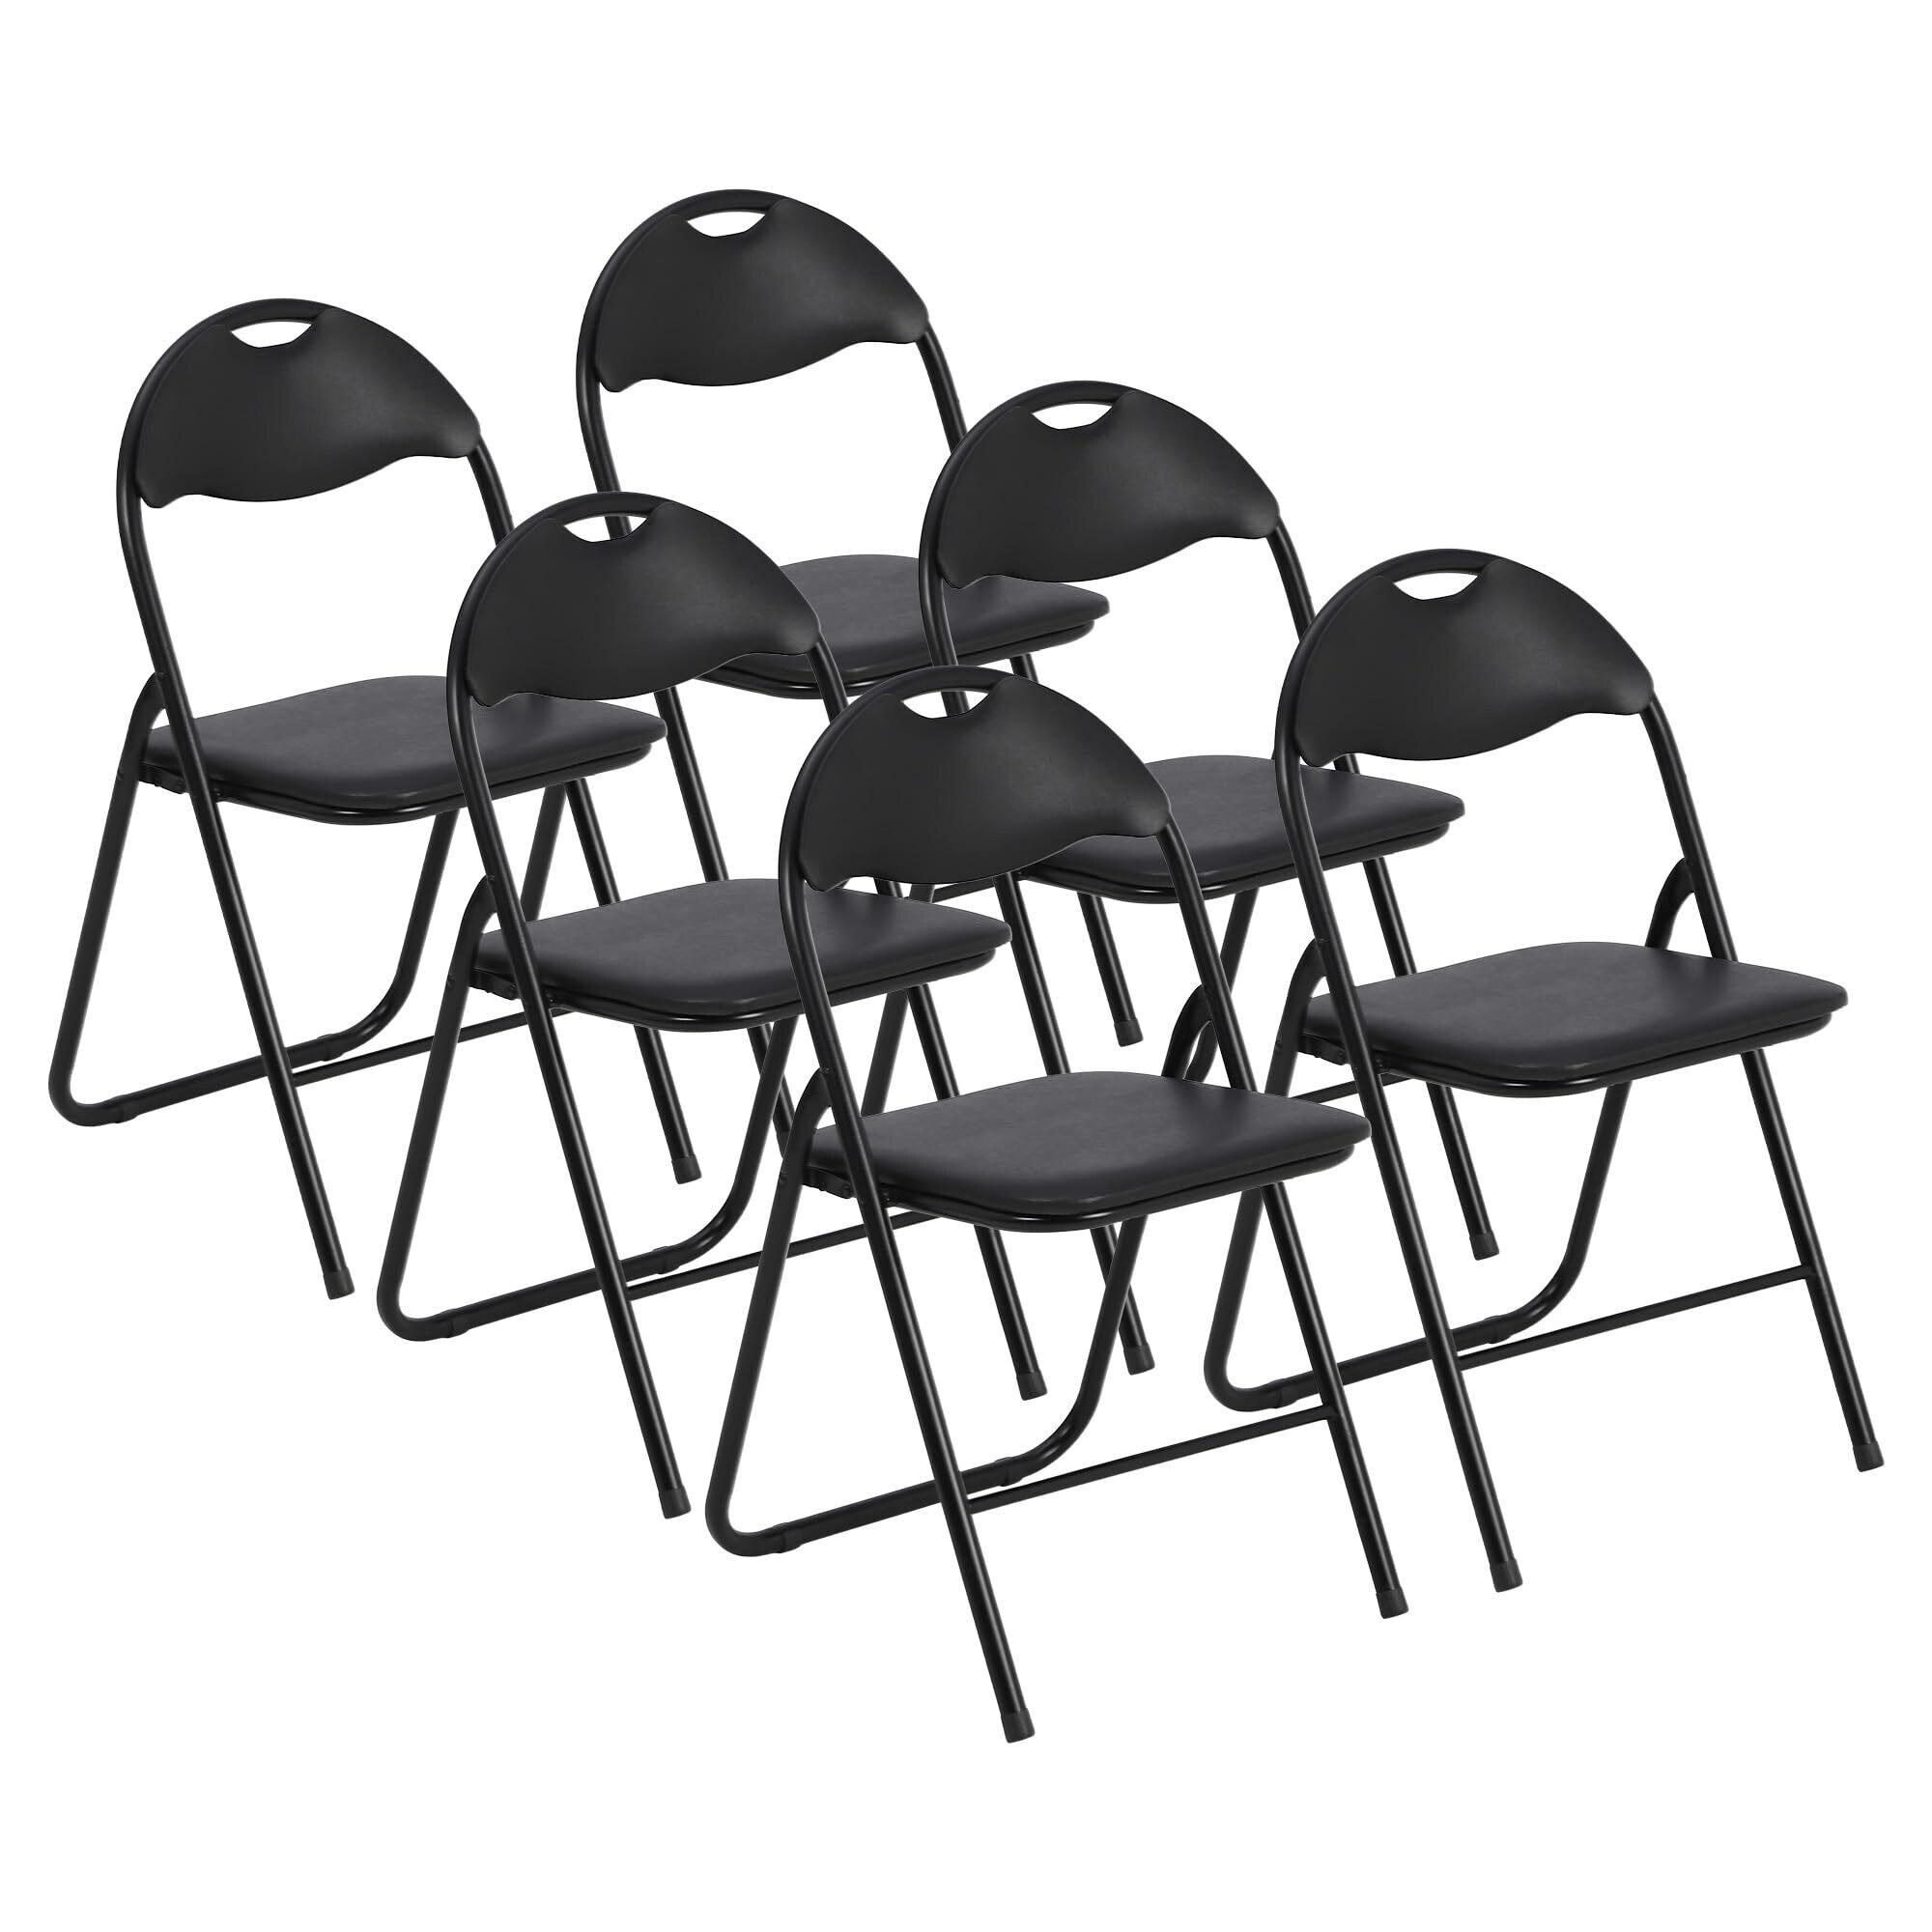 Folding Chairs with Padded Seats - Bed Bath & Beyond - 39468327